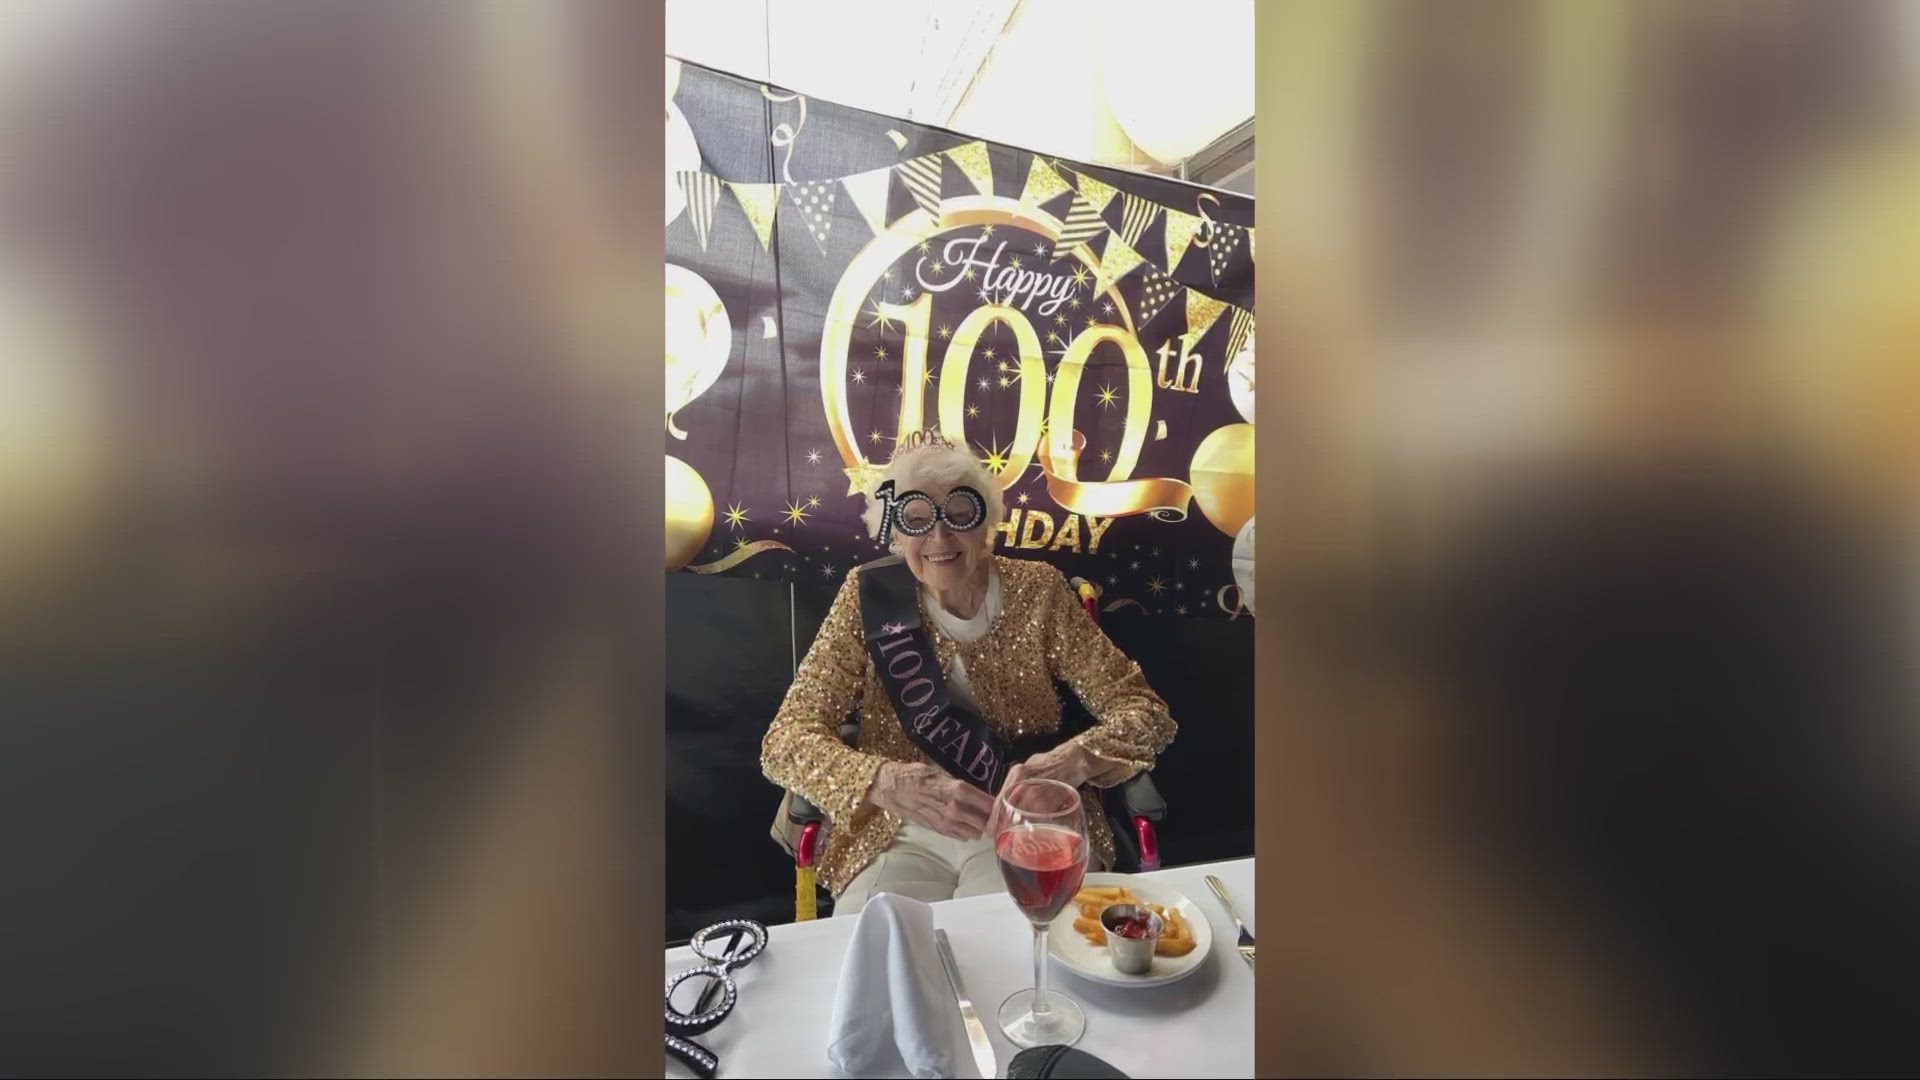 We'd like to wish a very special birthday greeting to Eleanor " Ellie " Lach who is turning 100 years old!